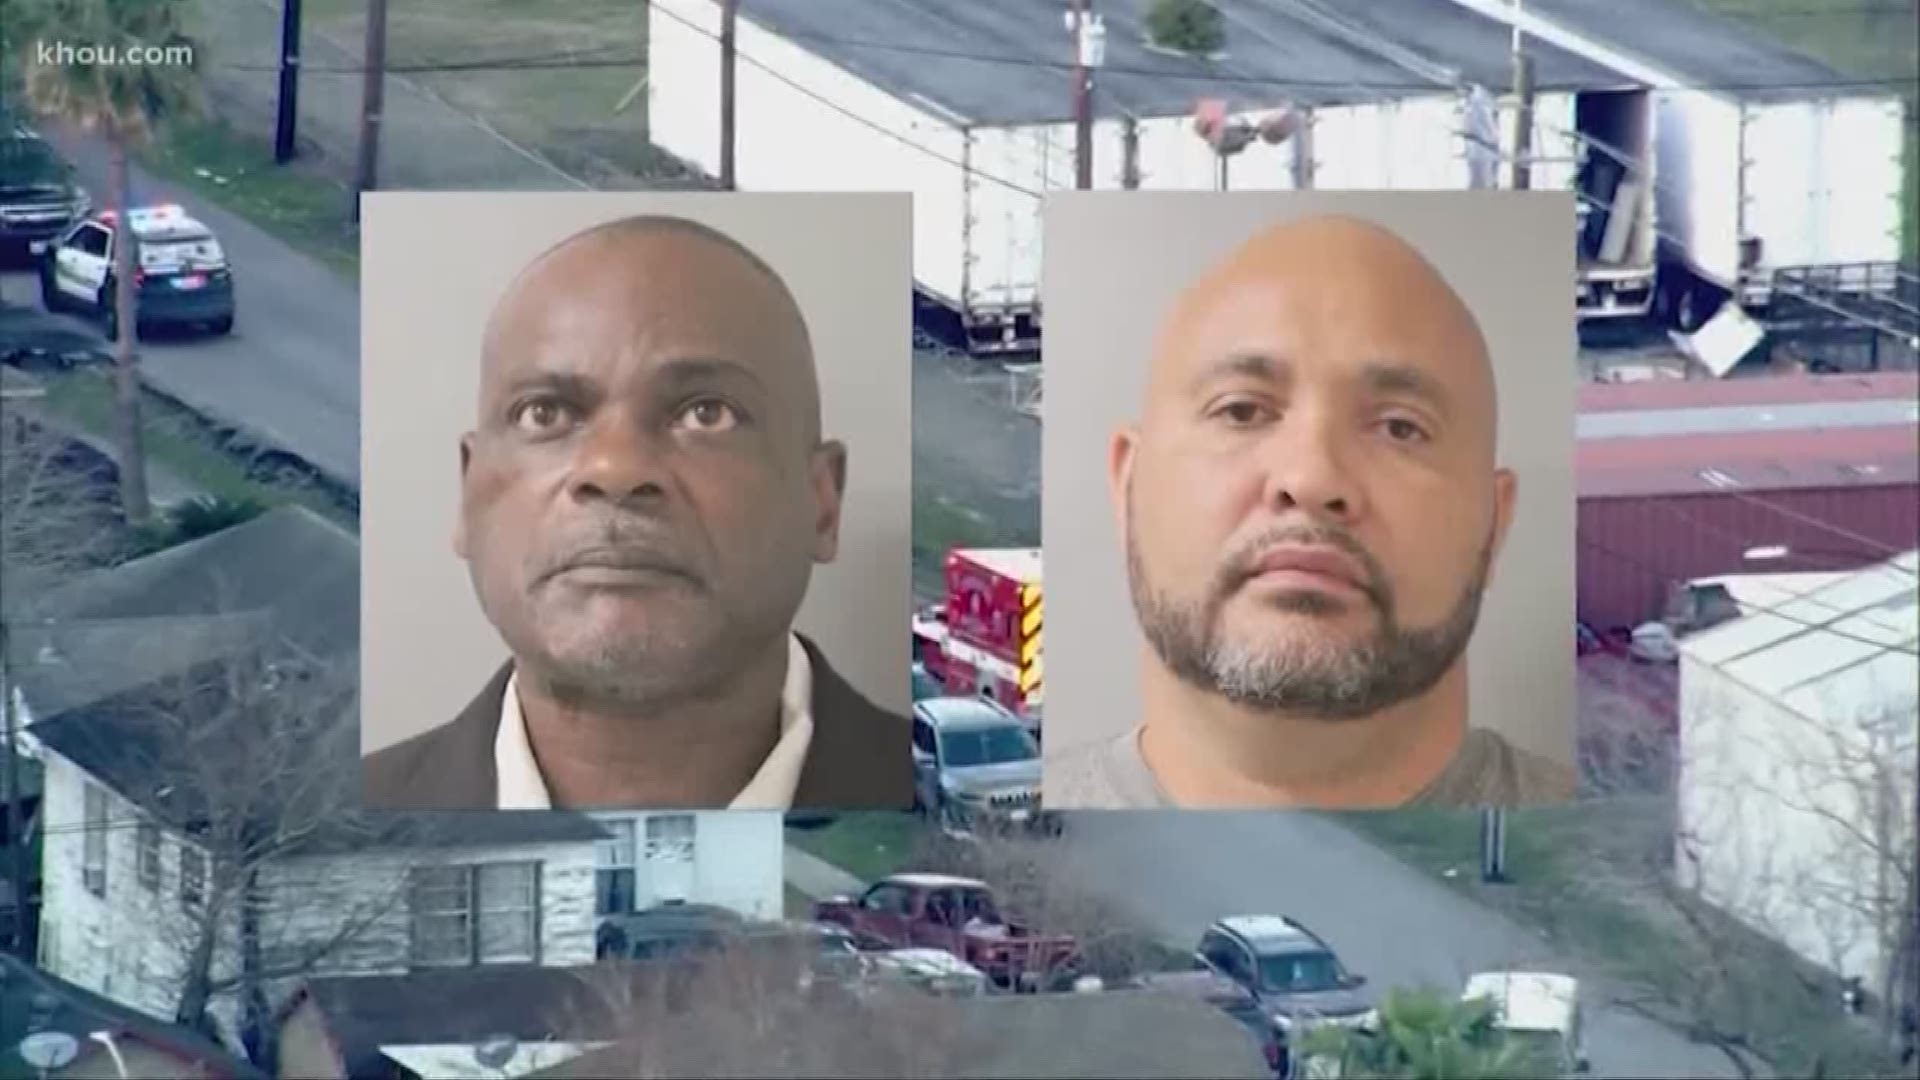 Former Houston police officers Steven Bryant and Gerald Goines have been indicted in the botched drug raid on Harding Street that left two people dead.